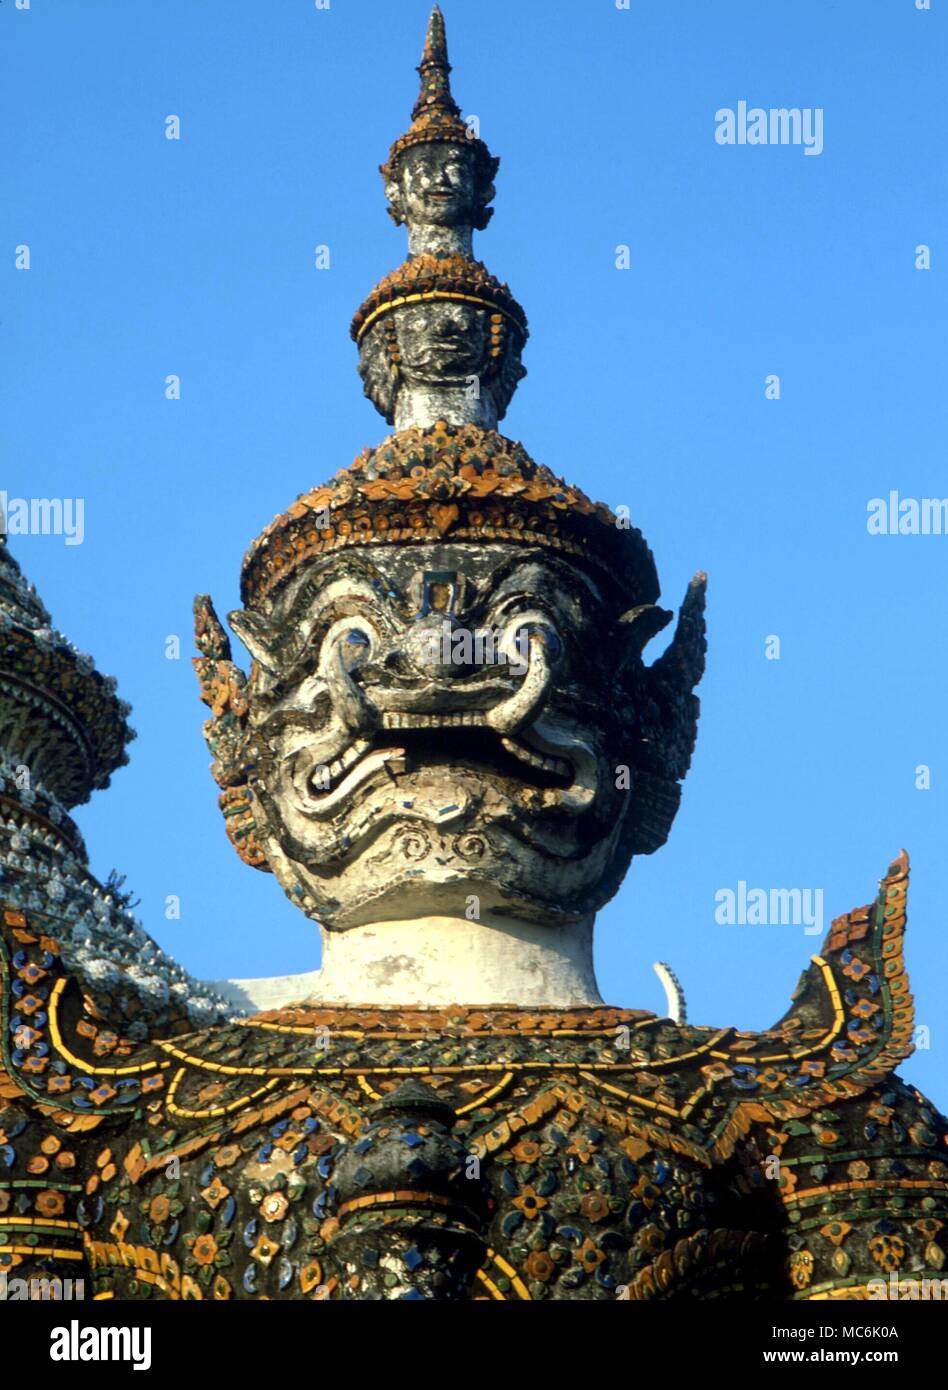 DEMONS - Temple guardian of gigantic size, in front of the main doorway of the Grand Palace Temple, Bangkok, Thailand Stock Photo